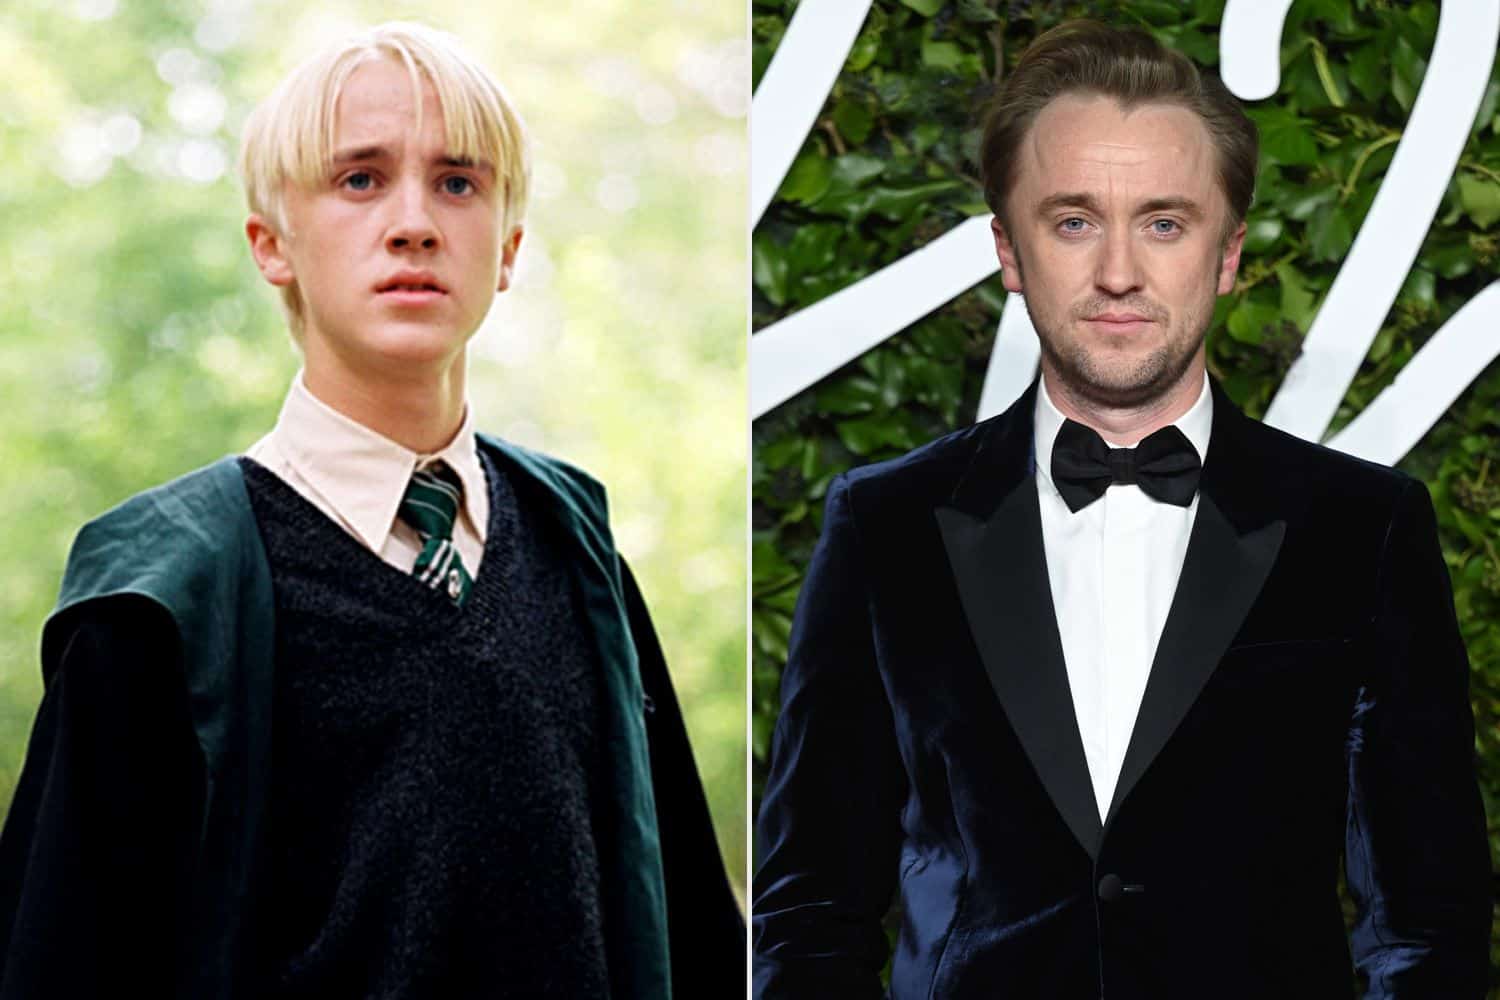 Tom Felton Then (Left) and Now (Right) (Credits: People)